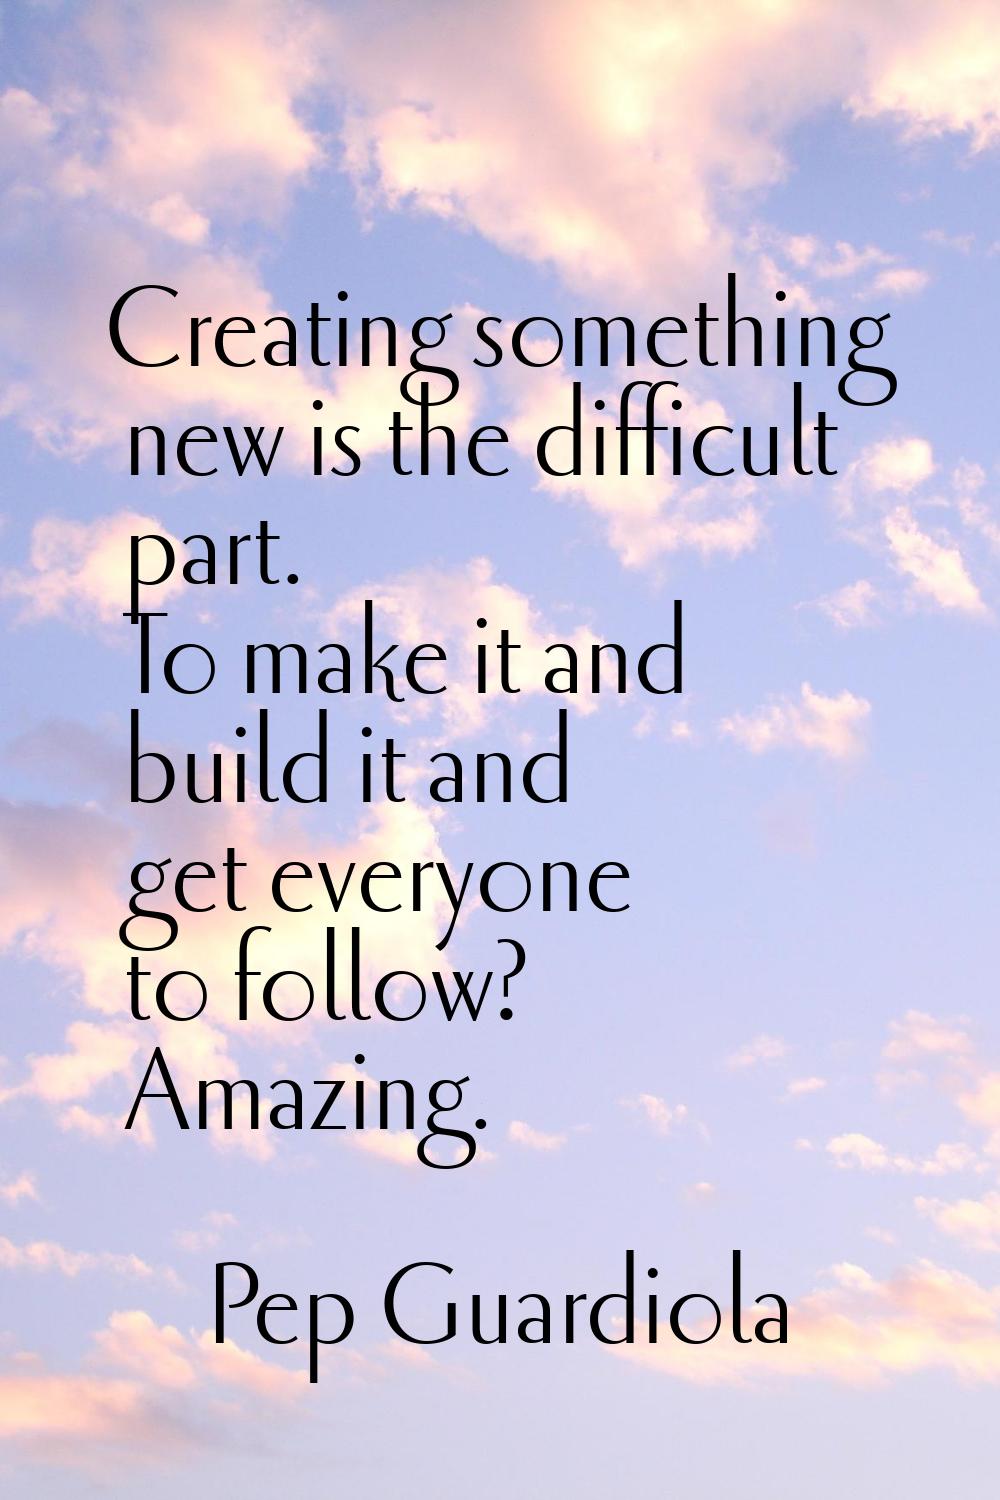 Creating something new is the difficult part. To make it and build it and get everyone to follow? A